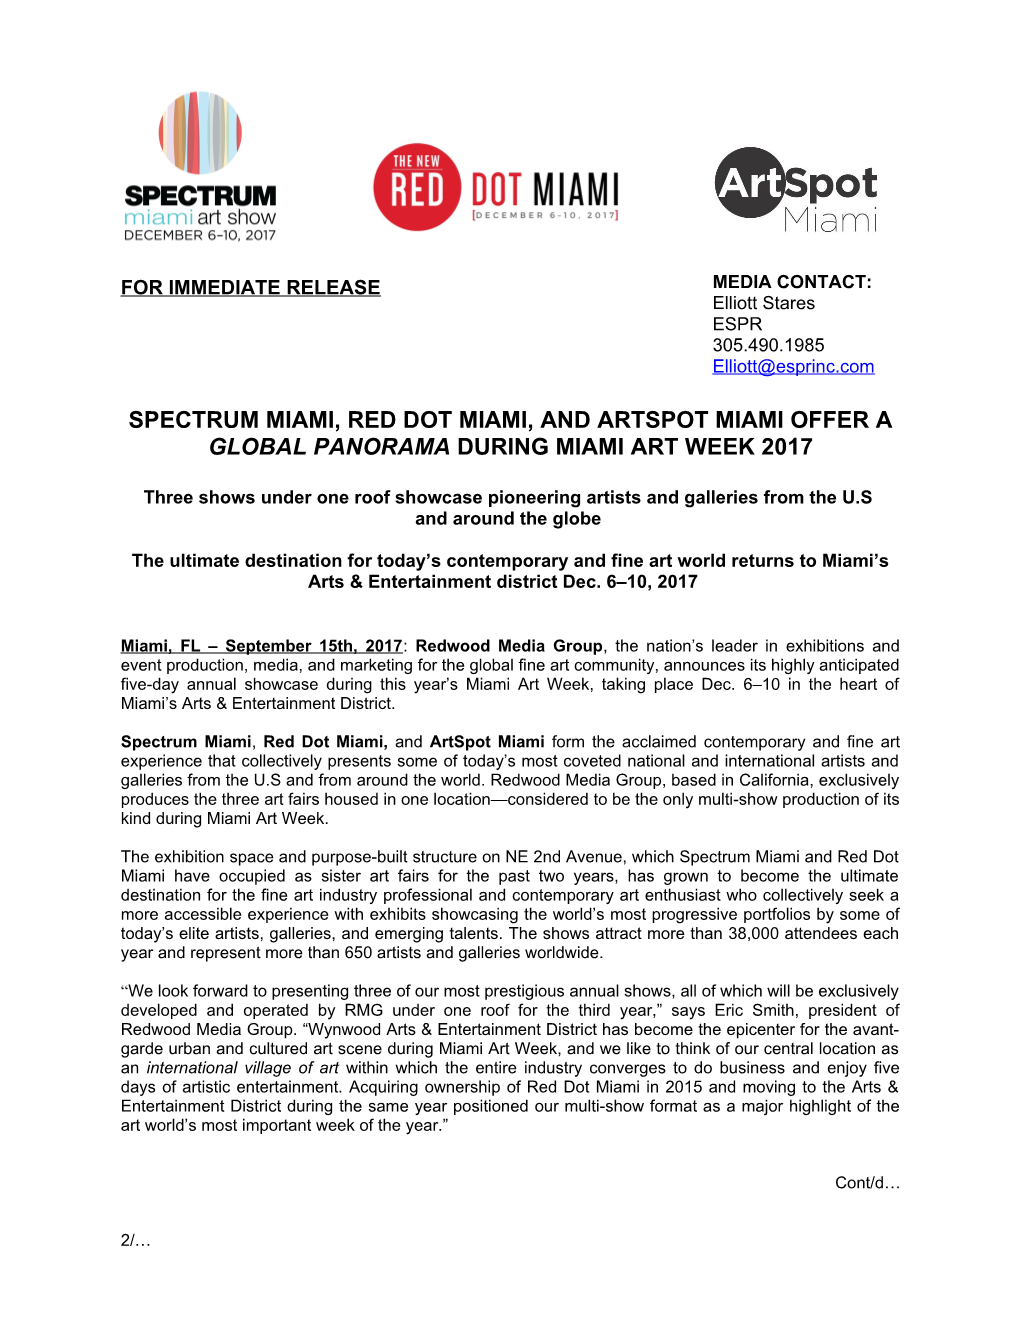 Spectrum Miami, Red Dot Miami and Artspot International Offers a Global Panorama During